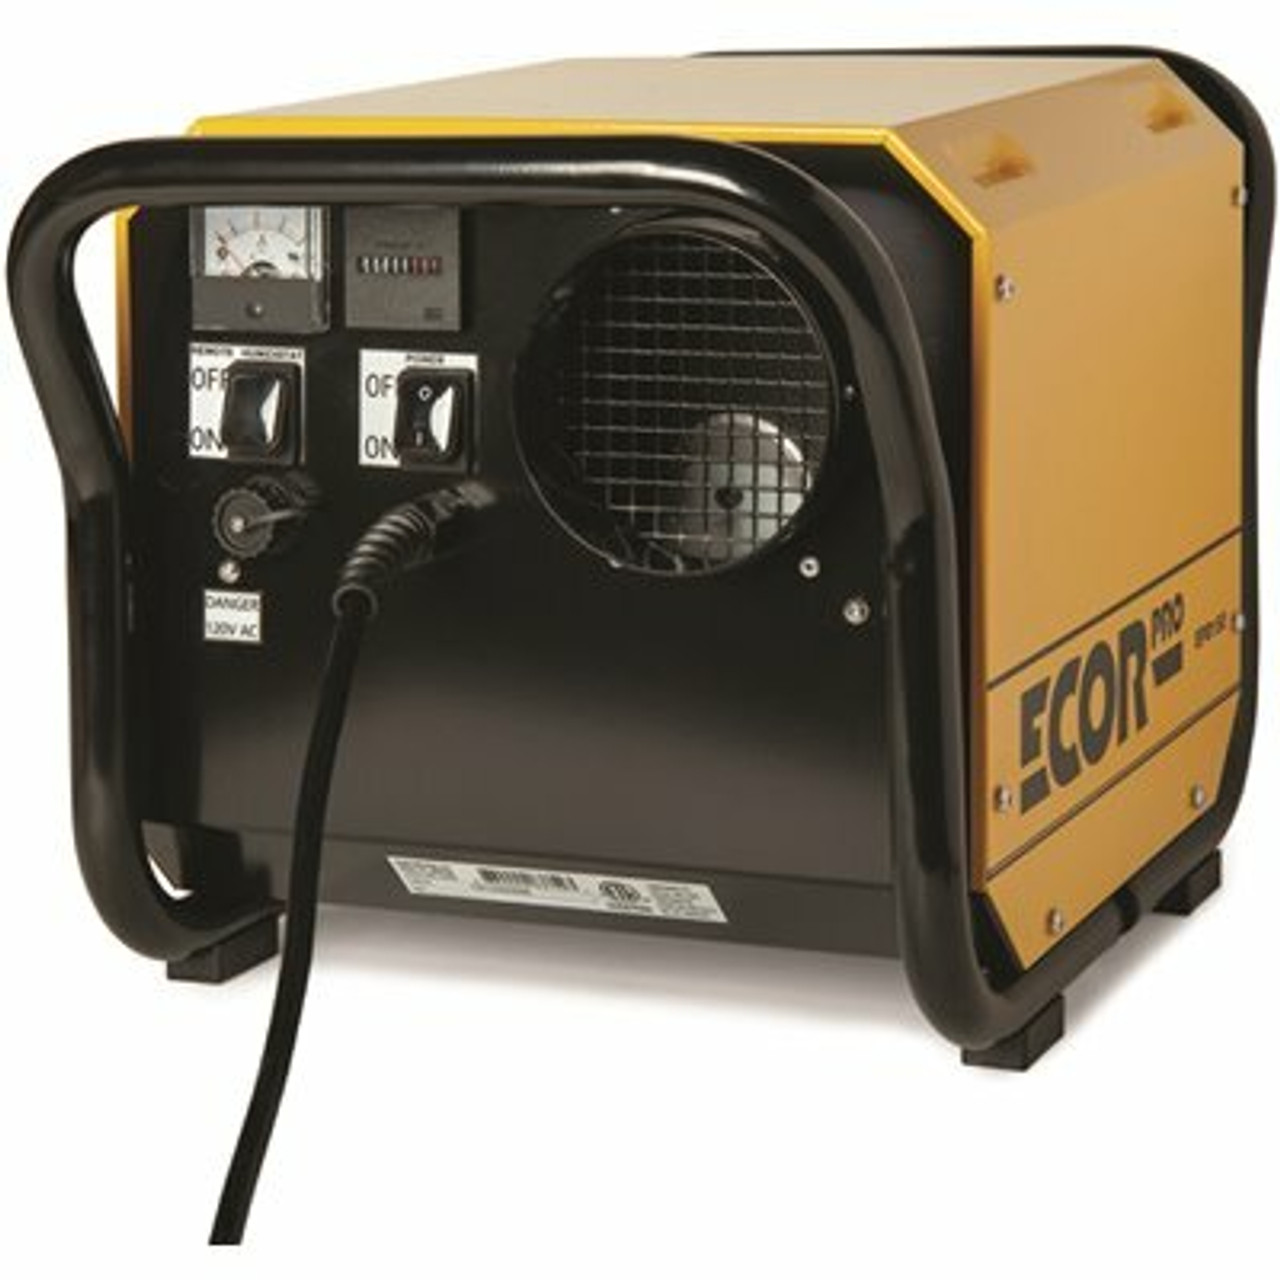 Ecor Pro 150 Pint Portable Industrial Desiccant Dehumidifier For Basement, Crawl Space, Whole House And Warehouses - Yellow